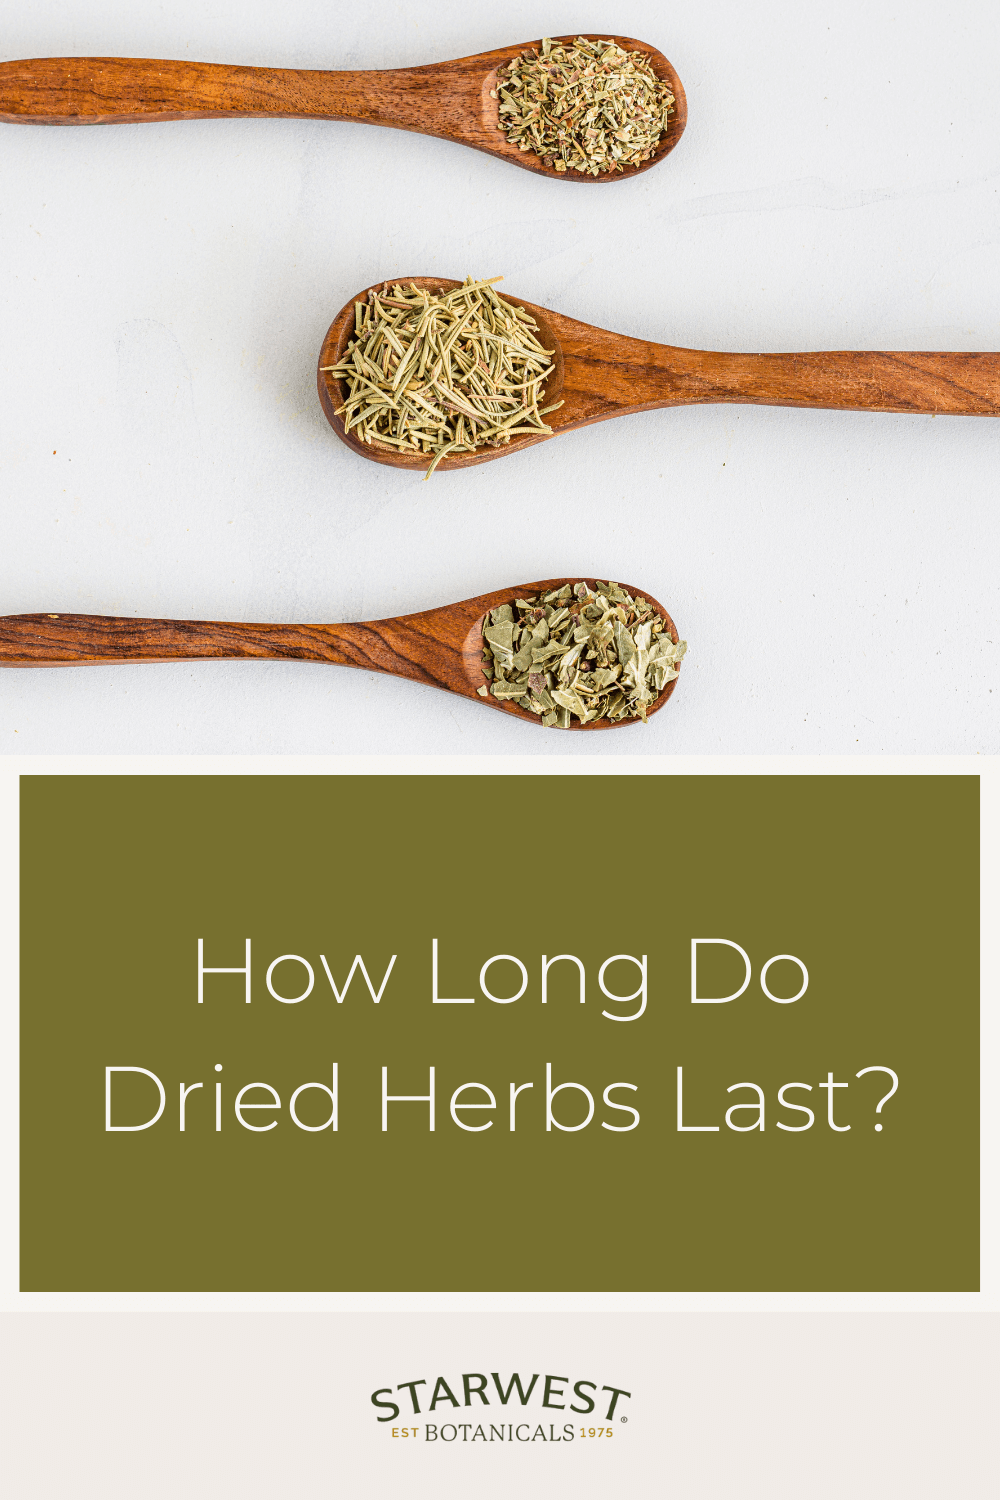 https://www.starwest-botanicals.com/product_images/uploaded_images/how-long-do-dried-herbs-last-1.png